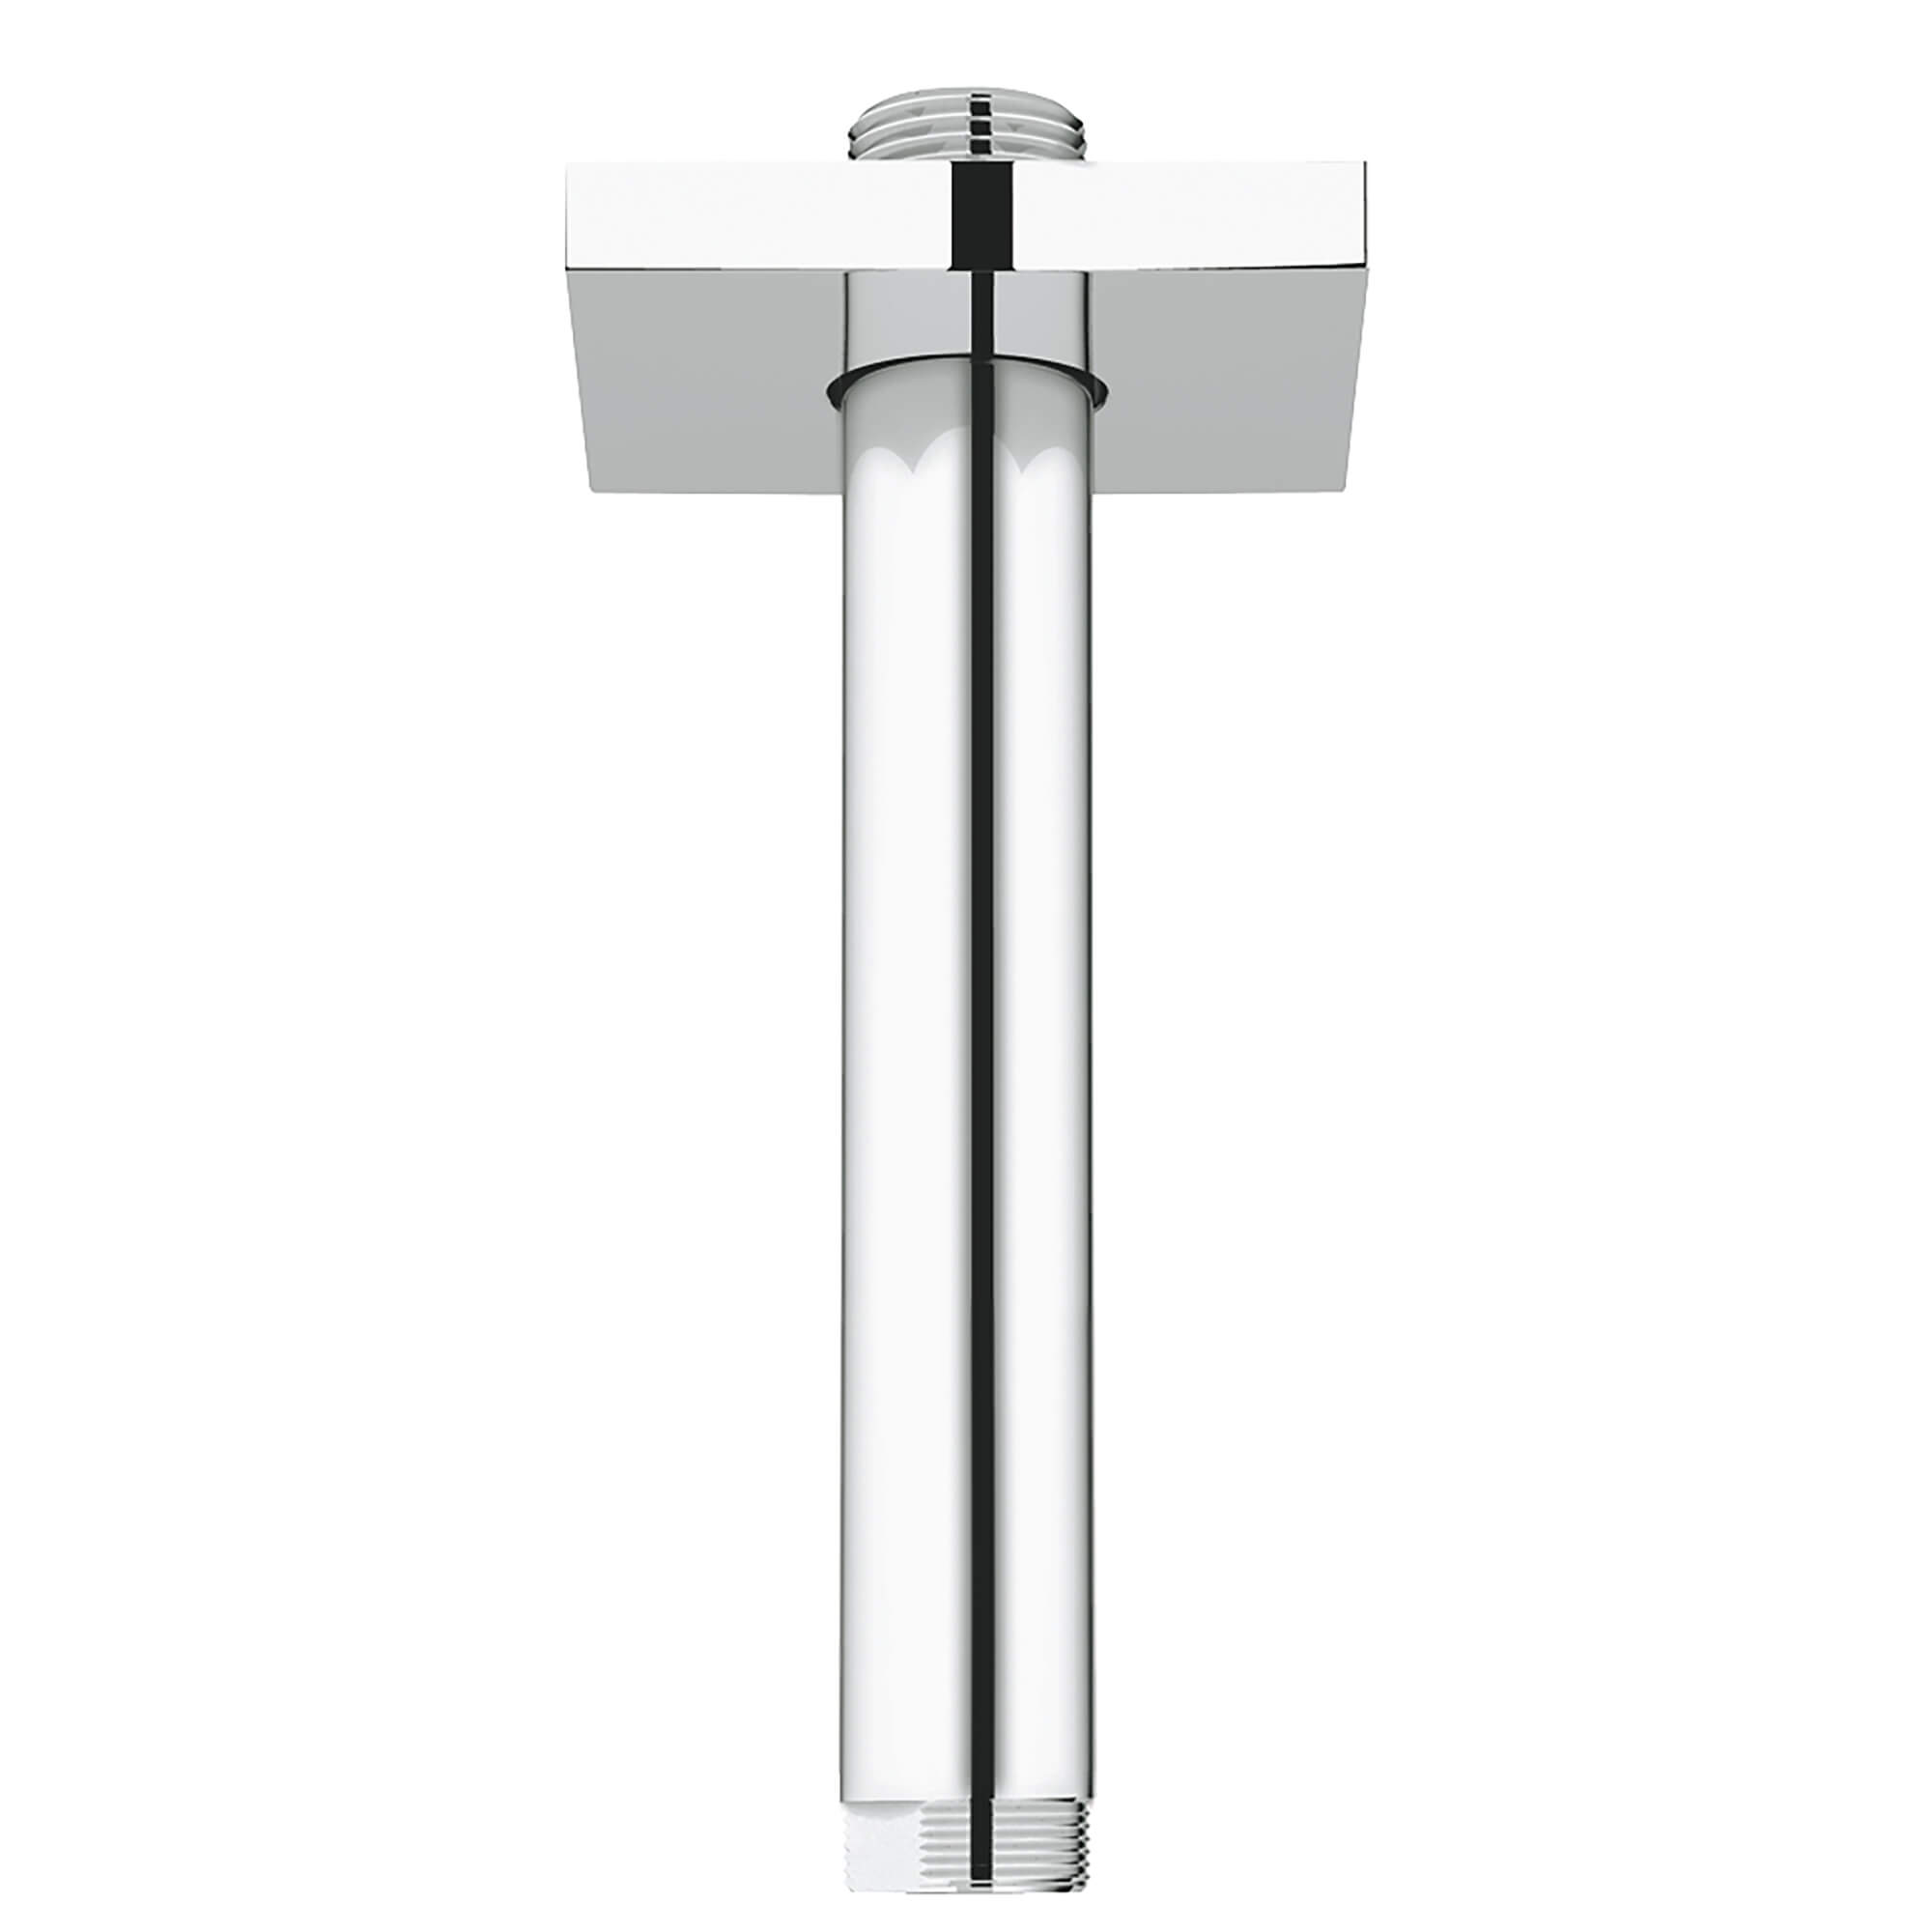 6" Ceiling Shower Arm With Square Flange